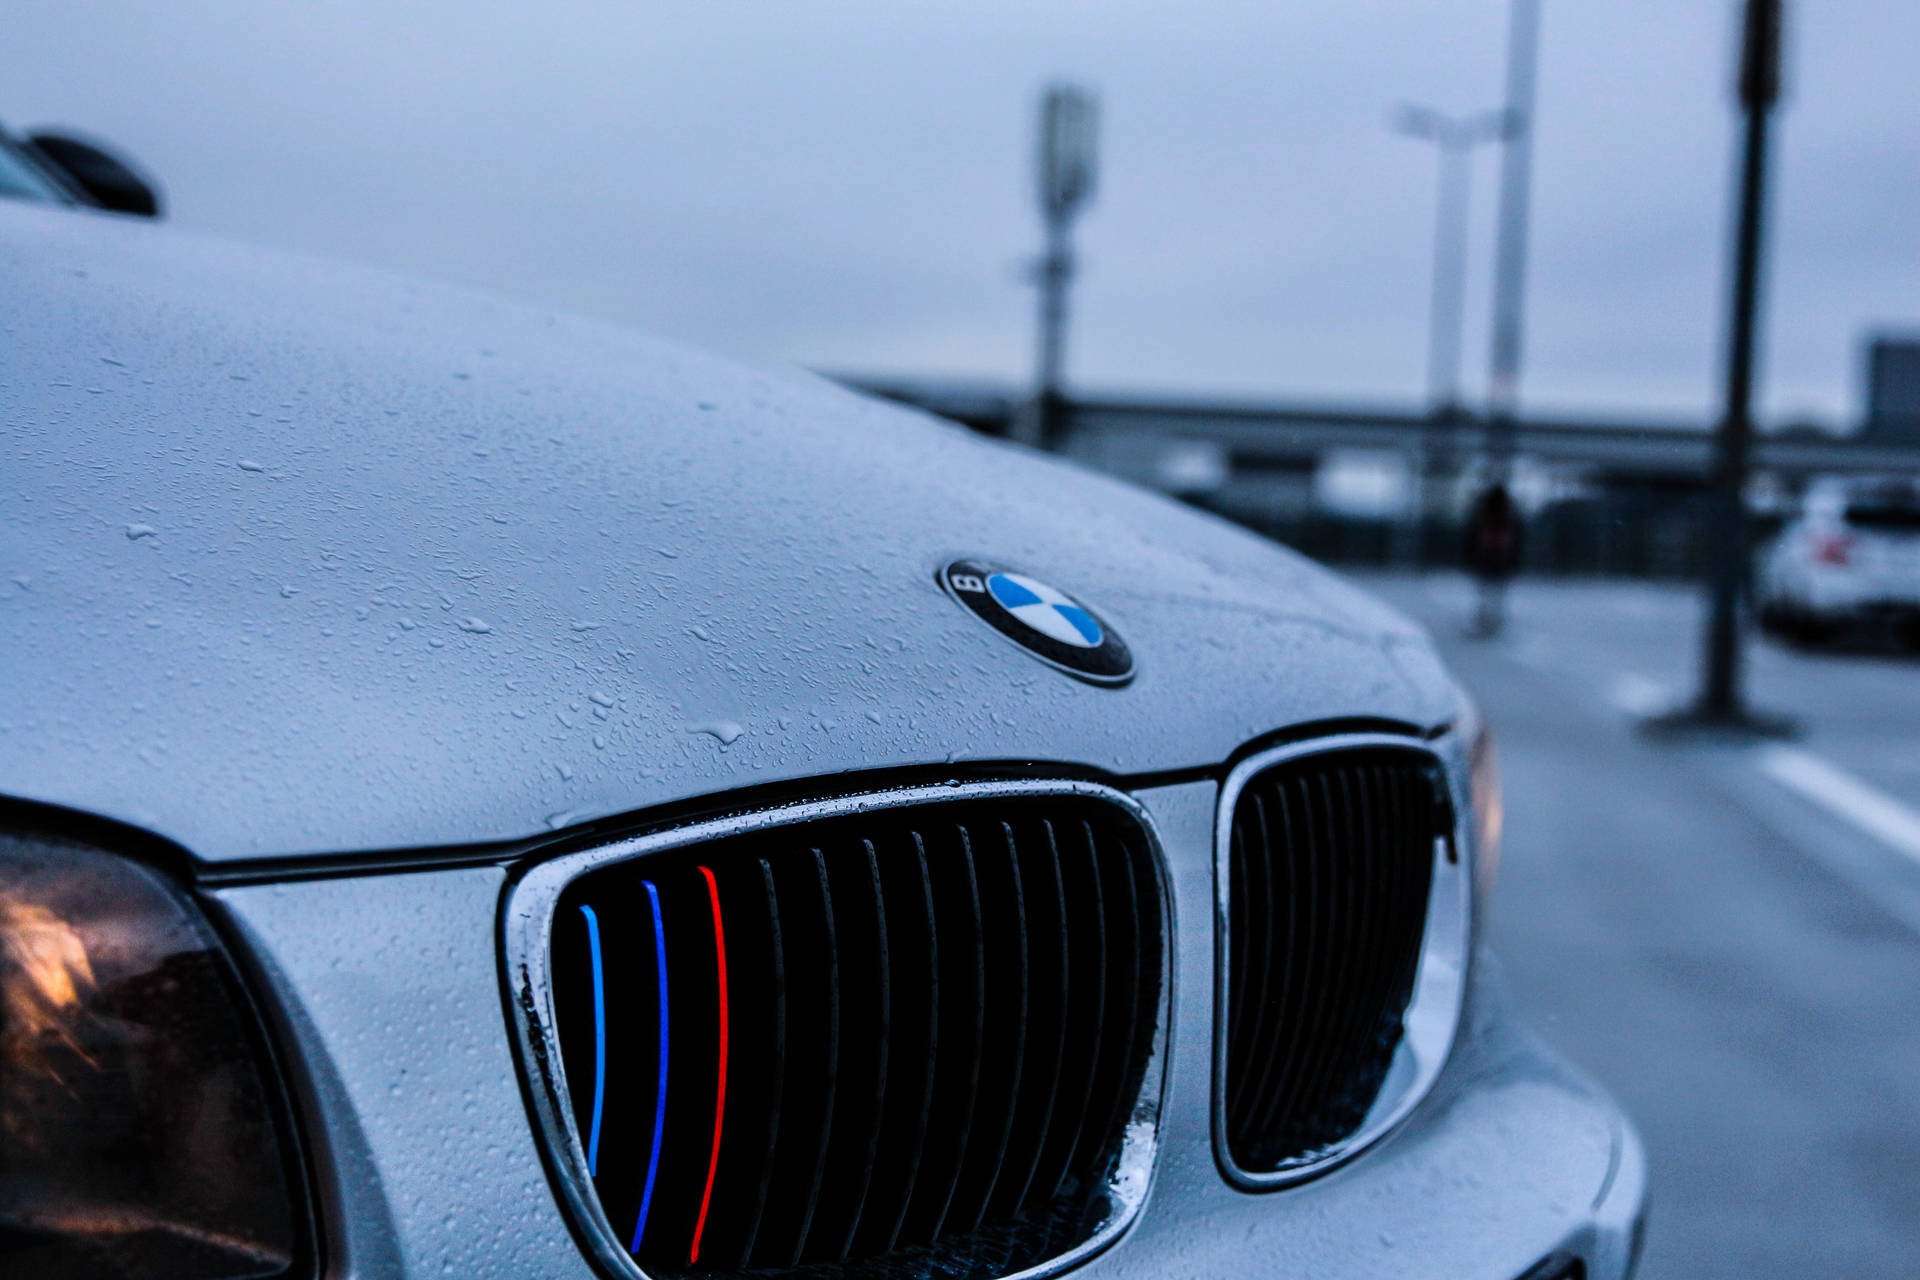 "The BMW Experience - Power and Luxury Embodied" Wallpaper